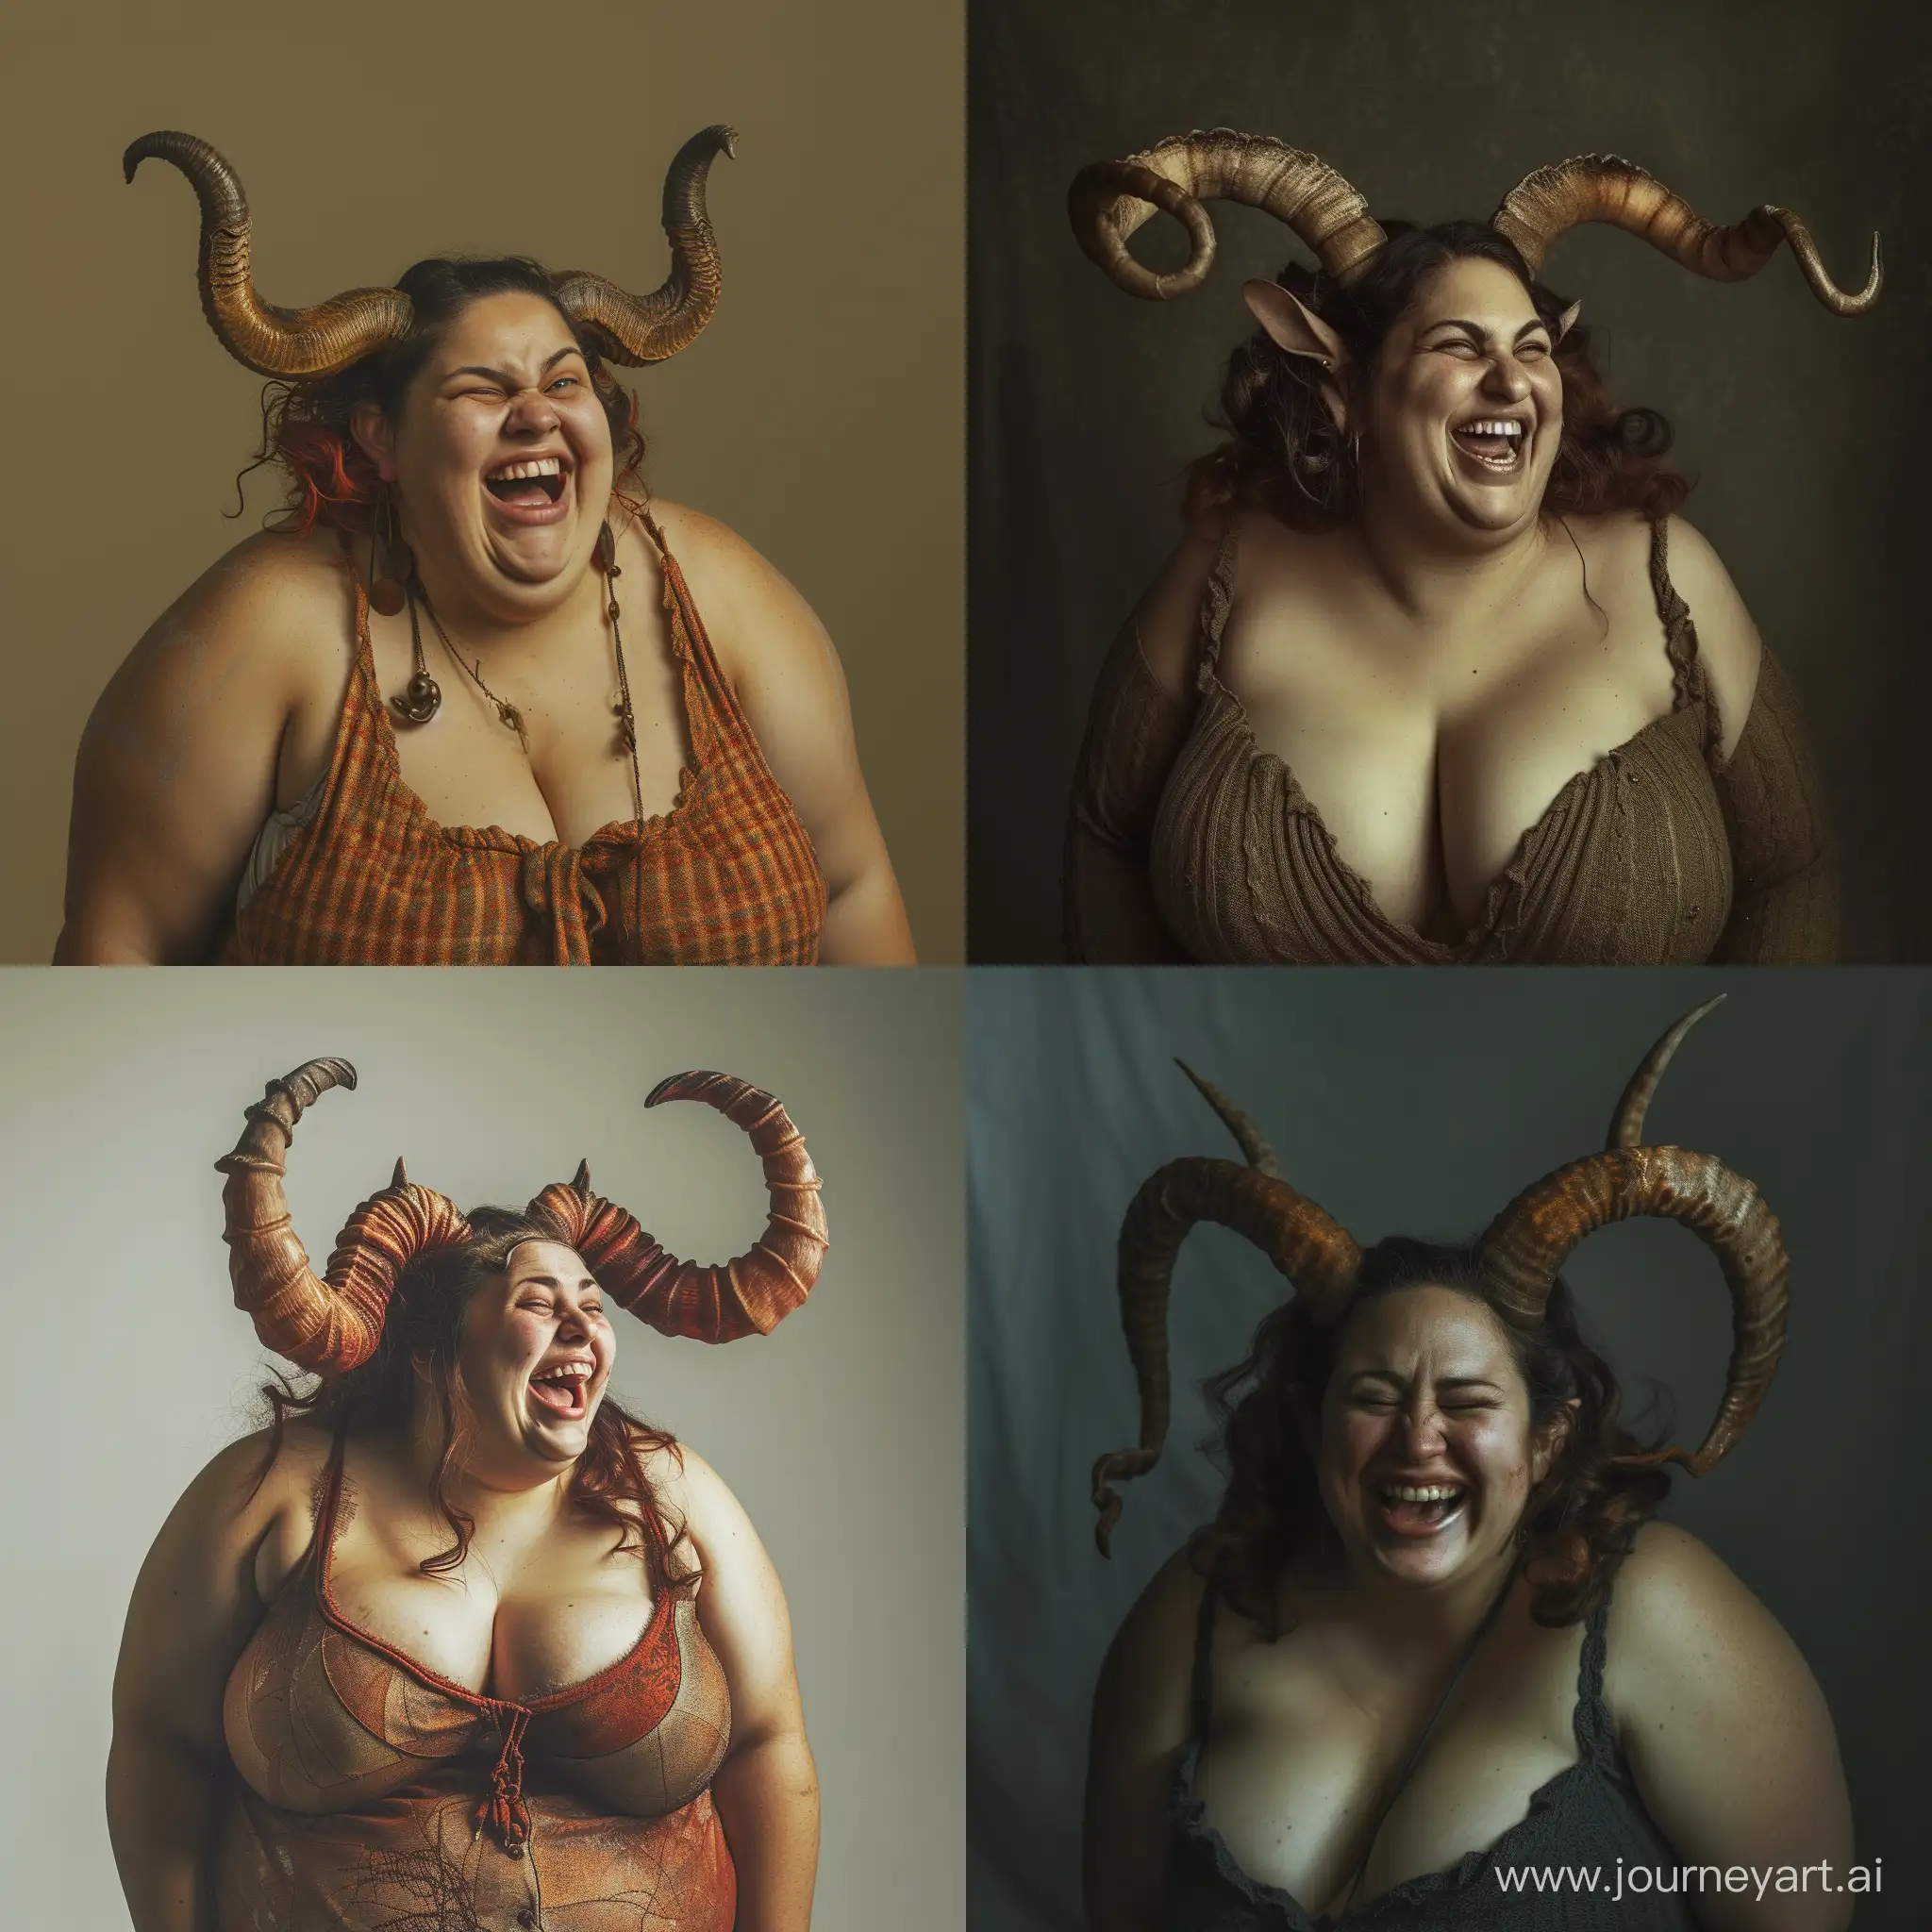 A very real woman who is fat and has two horns on her head and is laughing